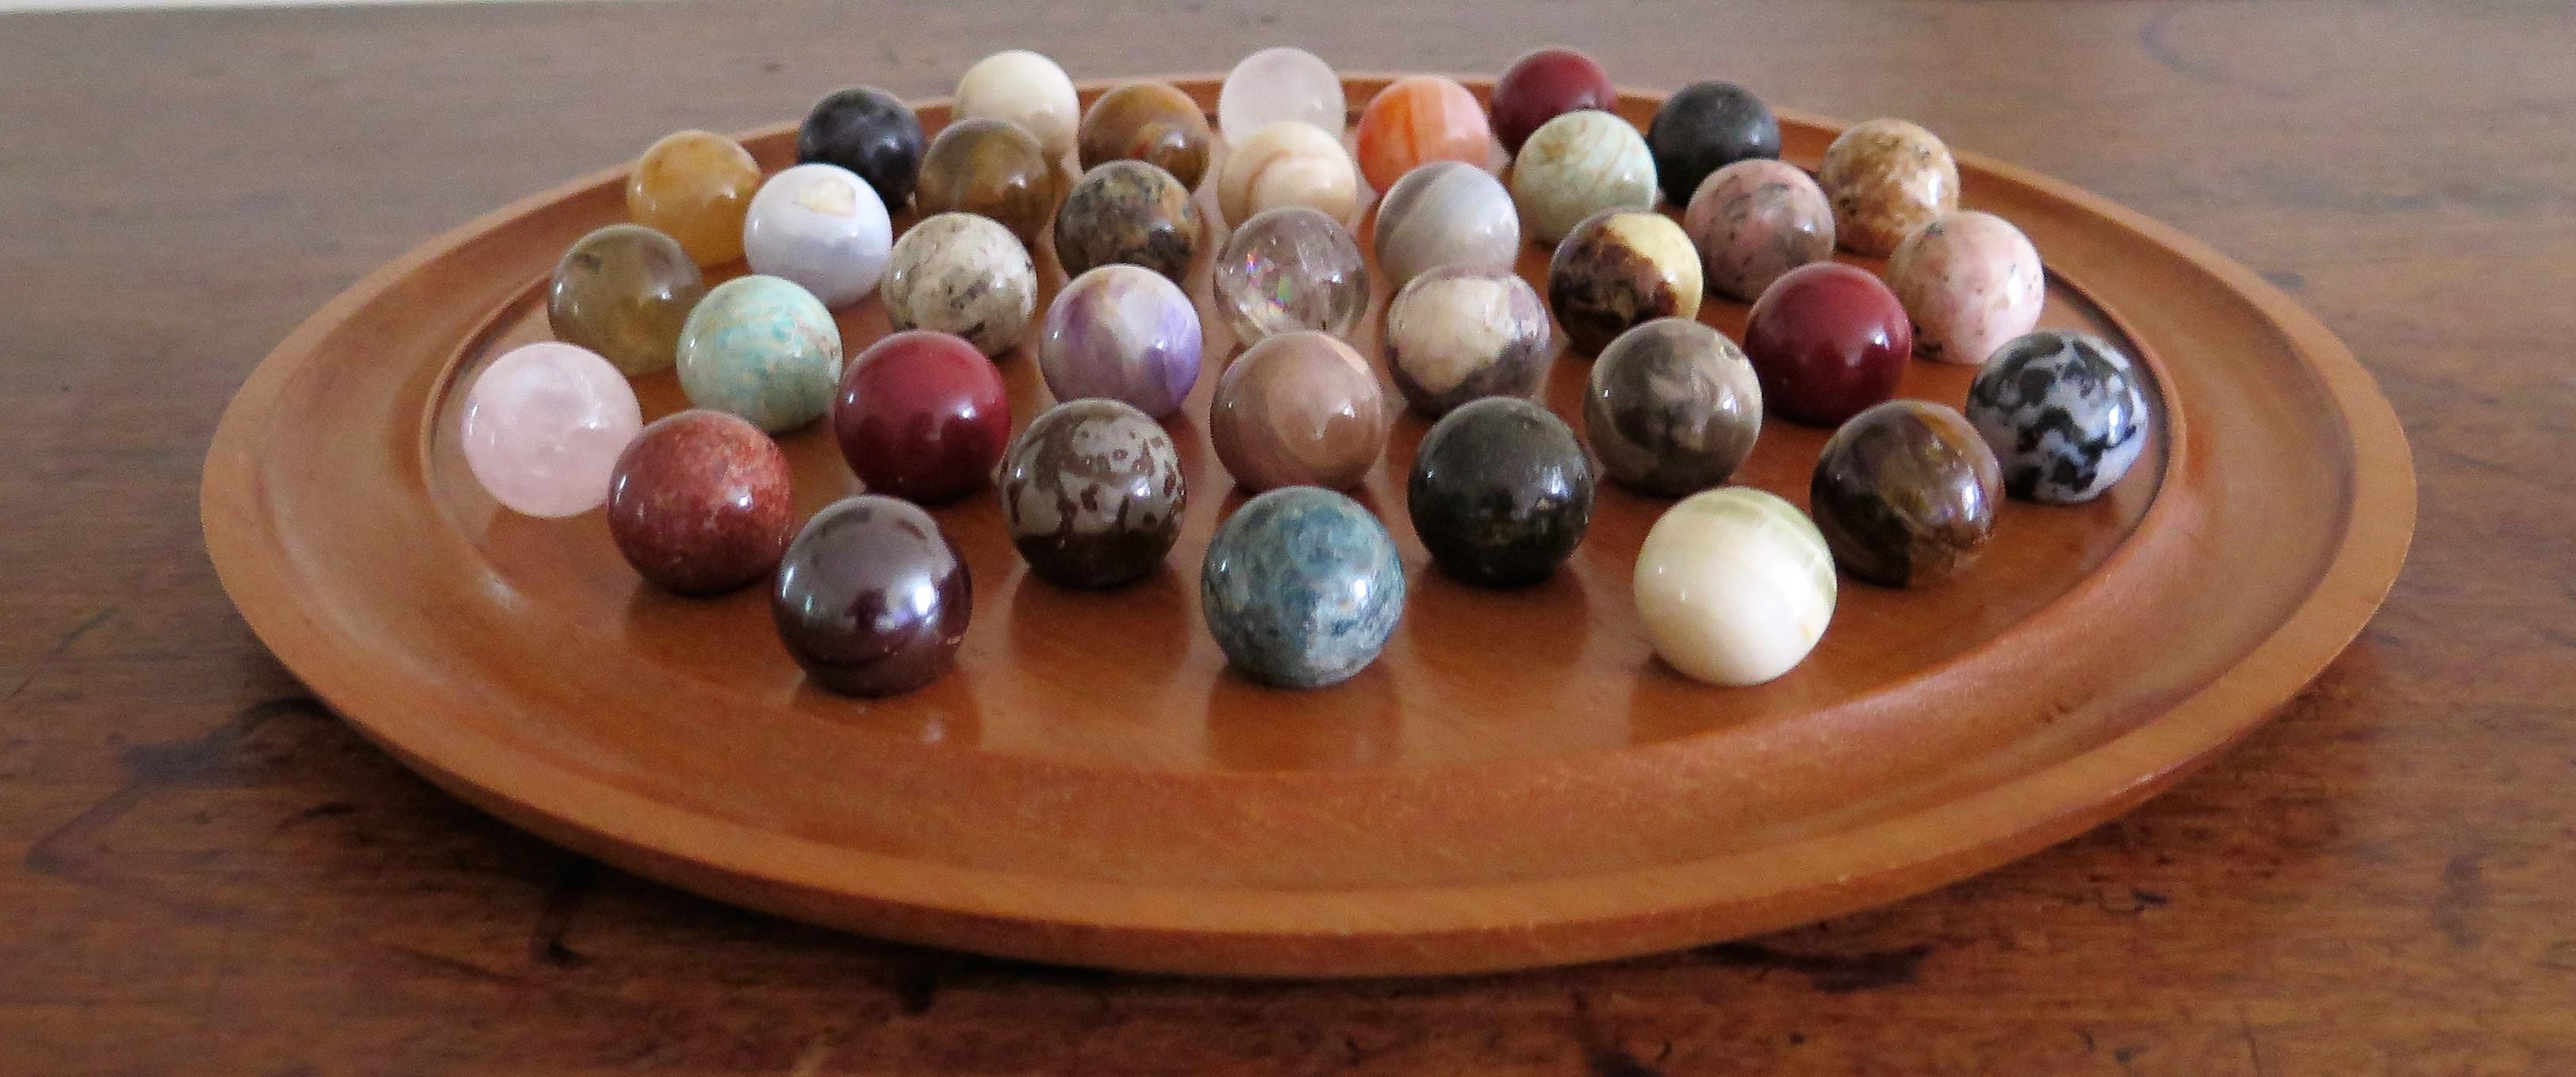 Hand-Crafted Large Marble Solitaire Board Game with 37 Agate Marbles, Late 19th Century